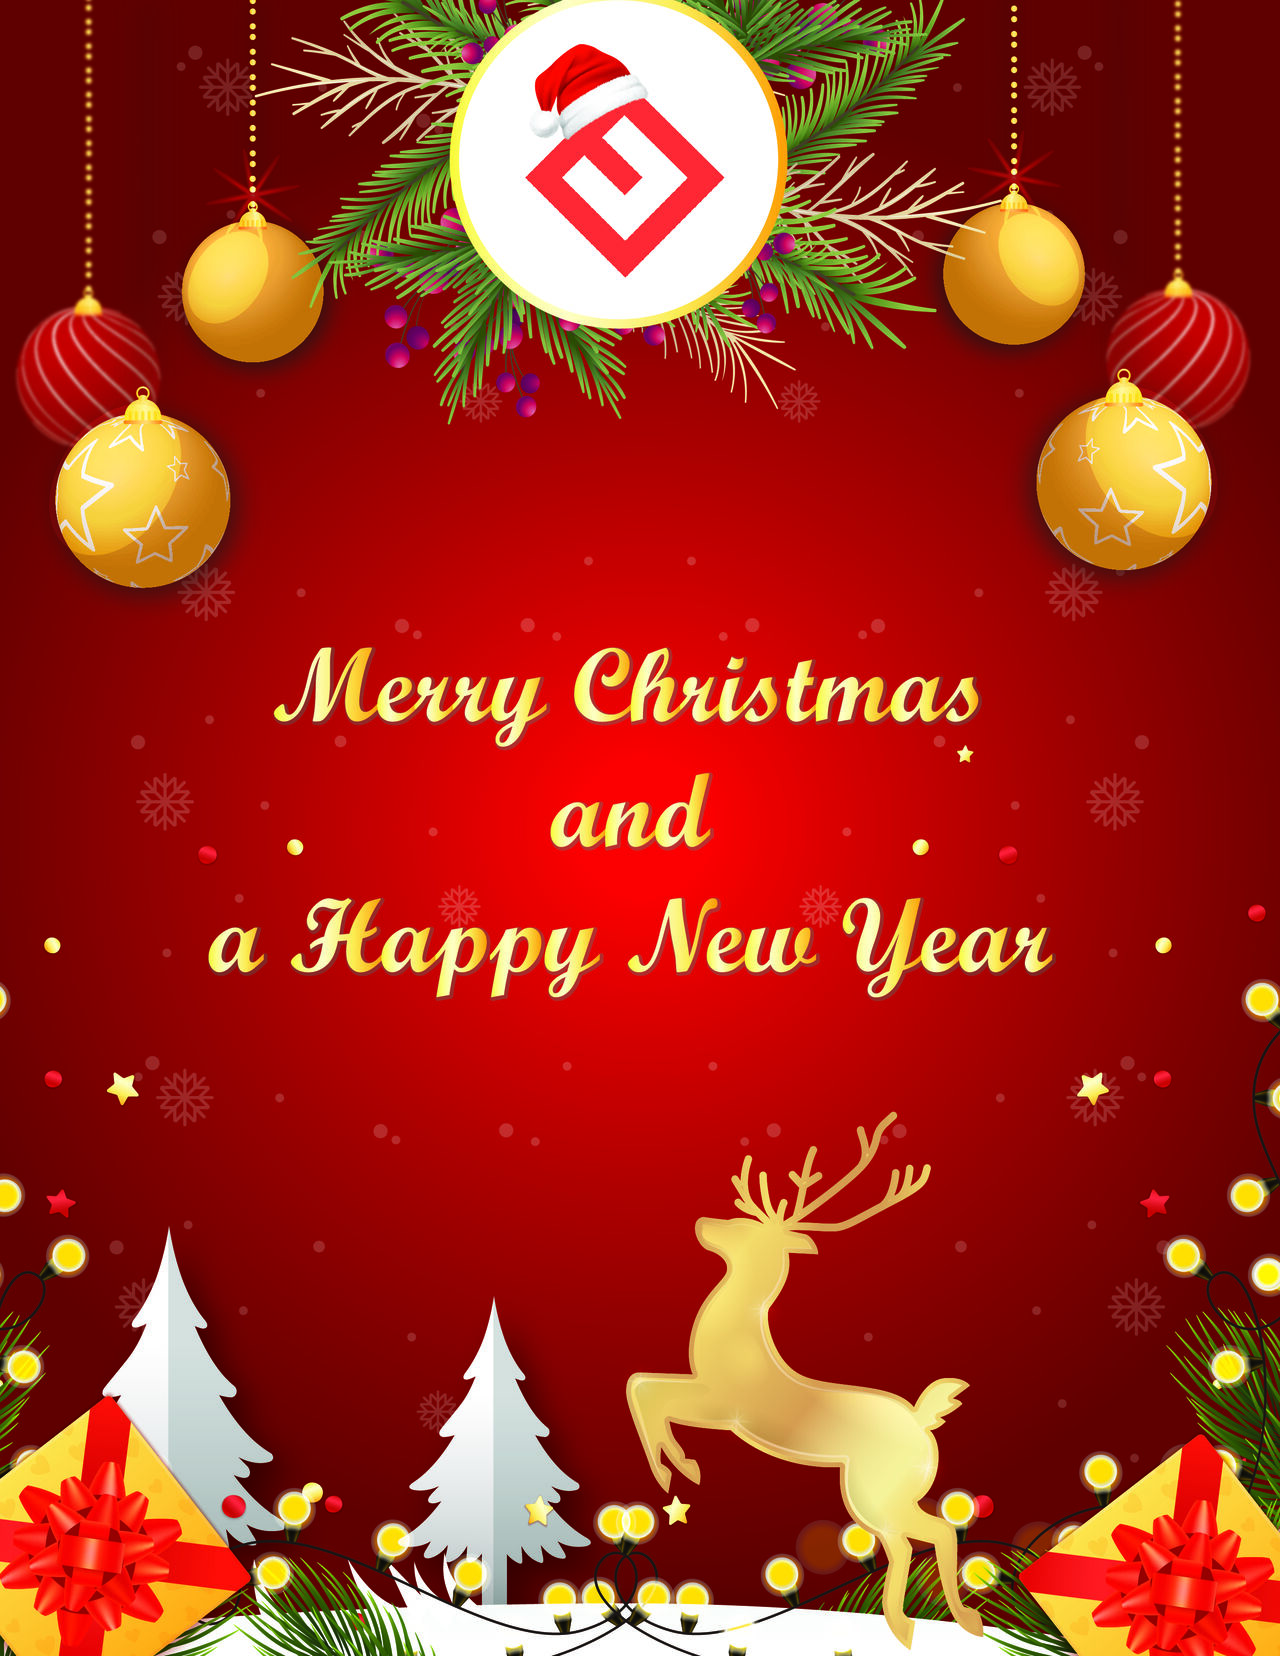 Merry Christmas and a Happy New Year